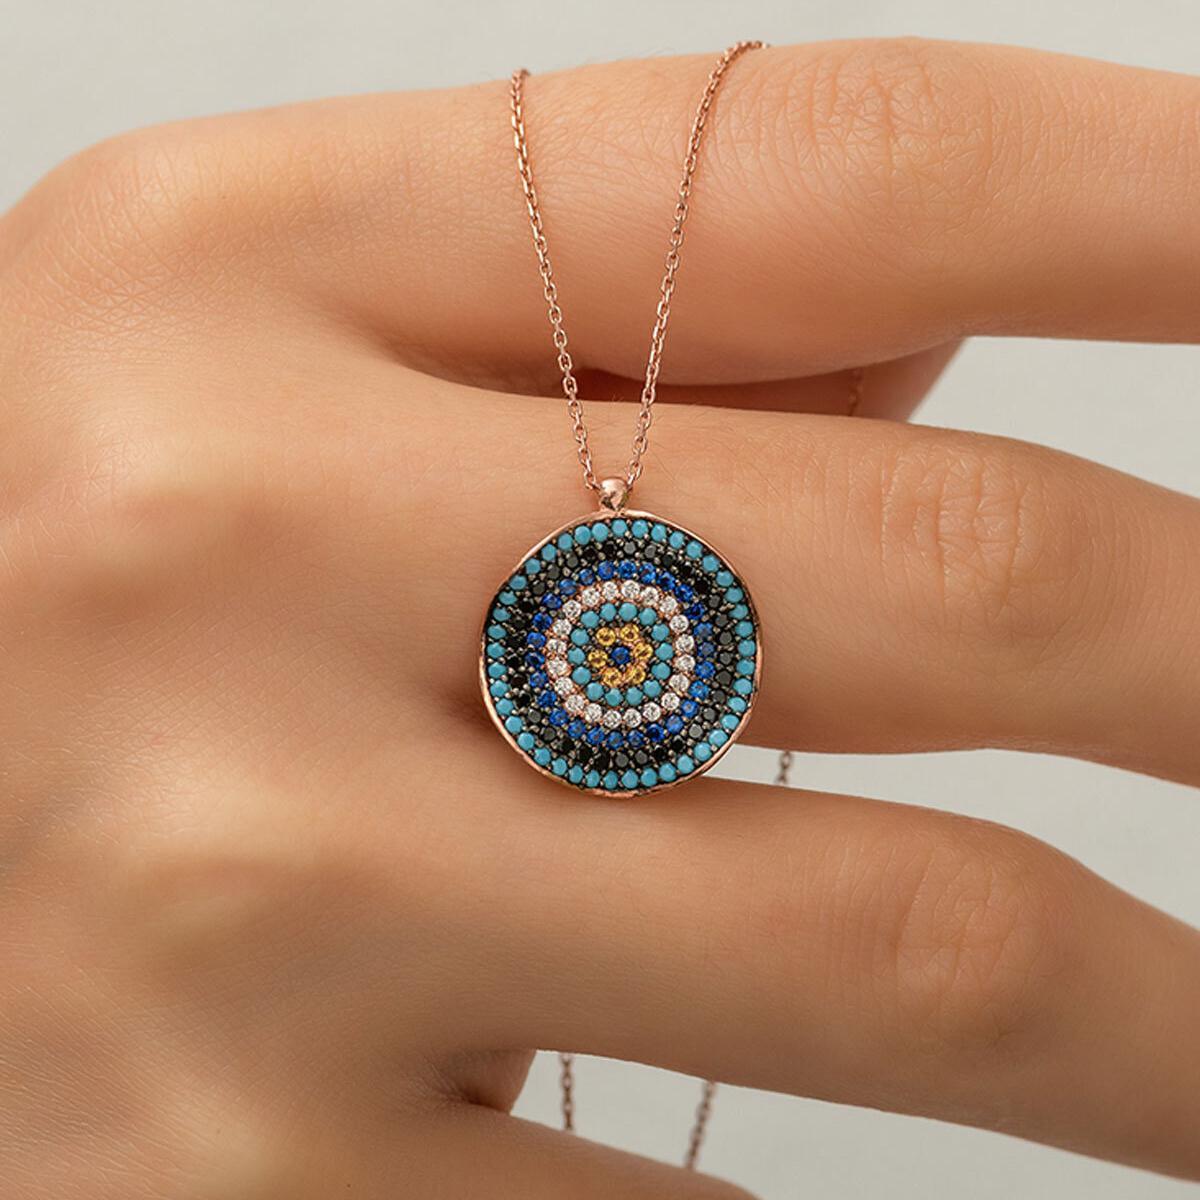 Italian Evil Eye Necklace • Evil Eye Protection Necklace - Trending Silver Gifts